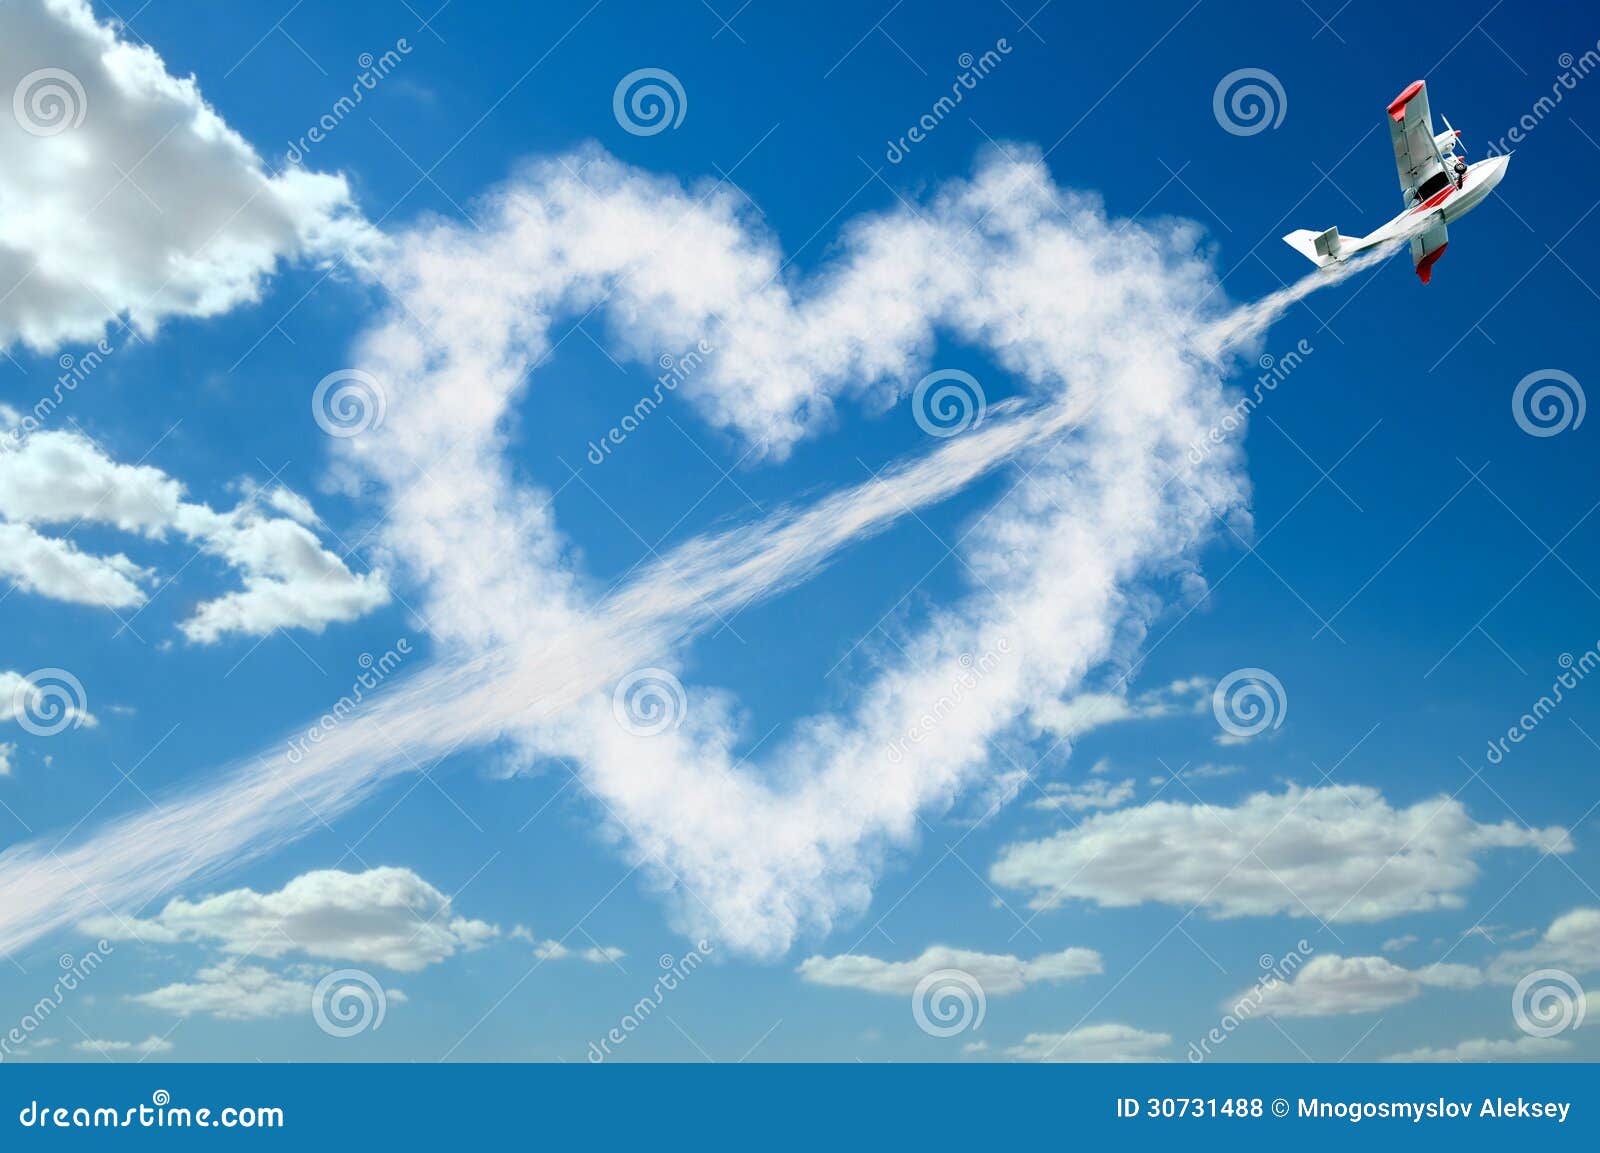 Twin Engine Hydroplane Flight Sky And Draw White Heart Clouds